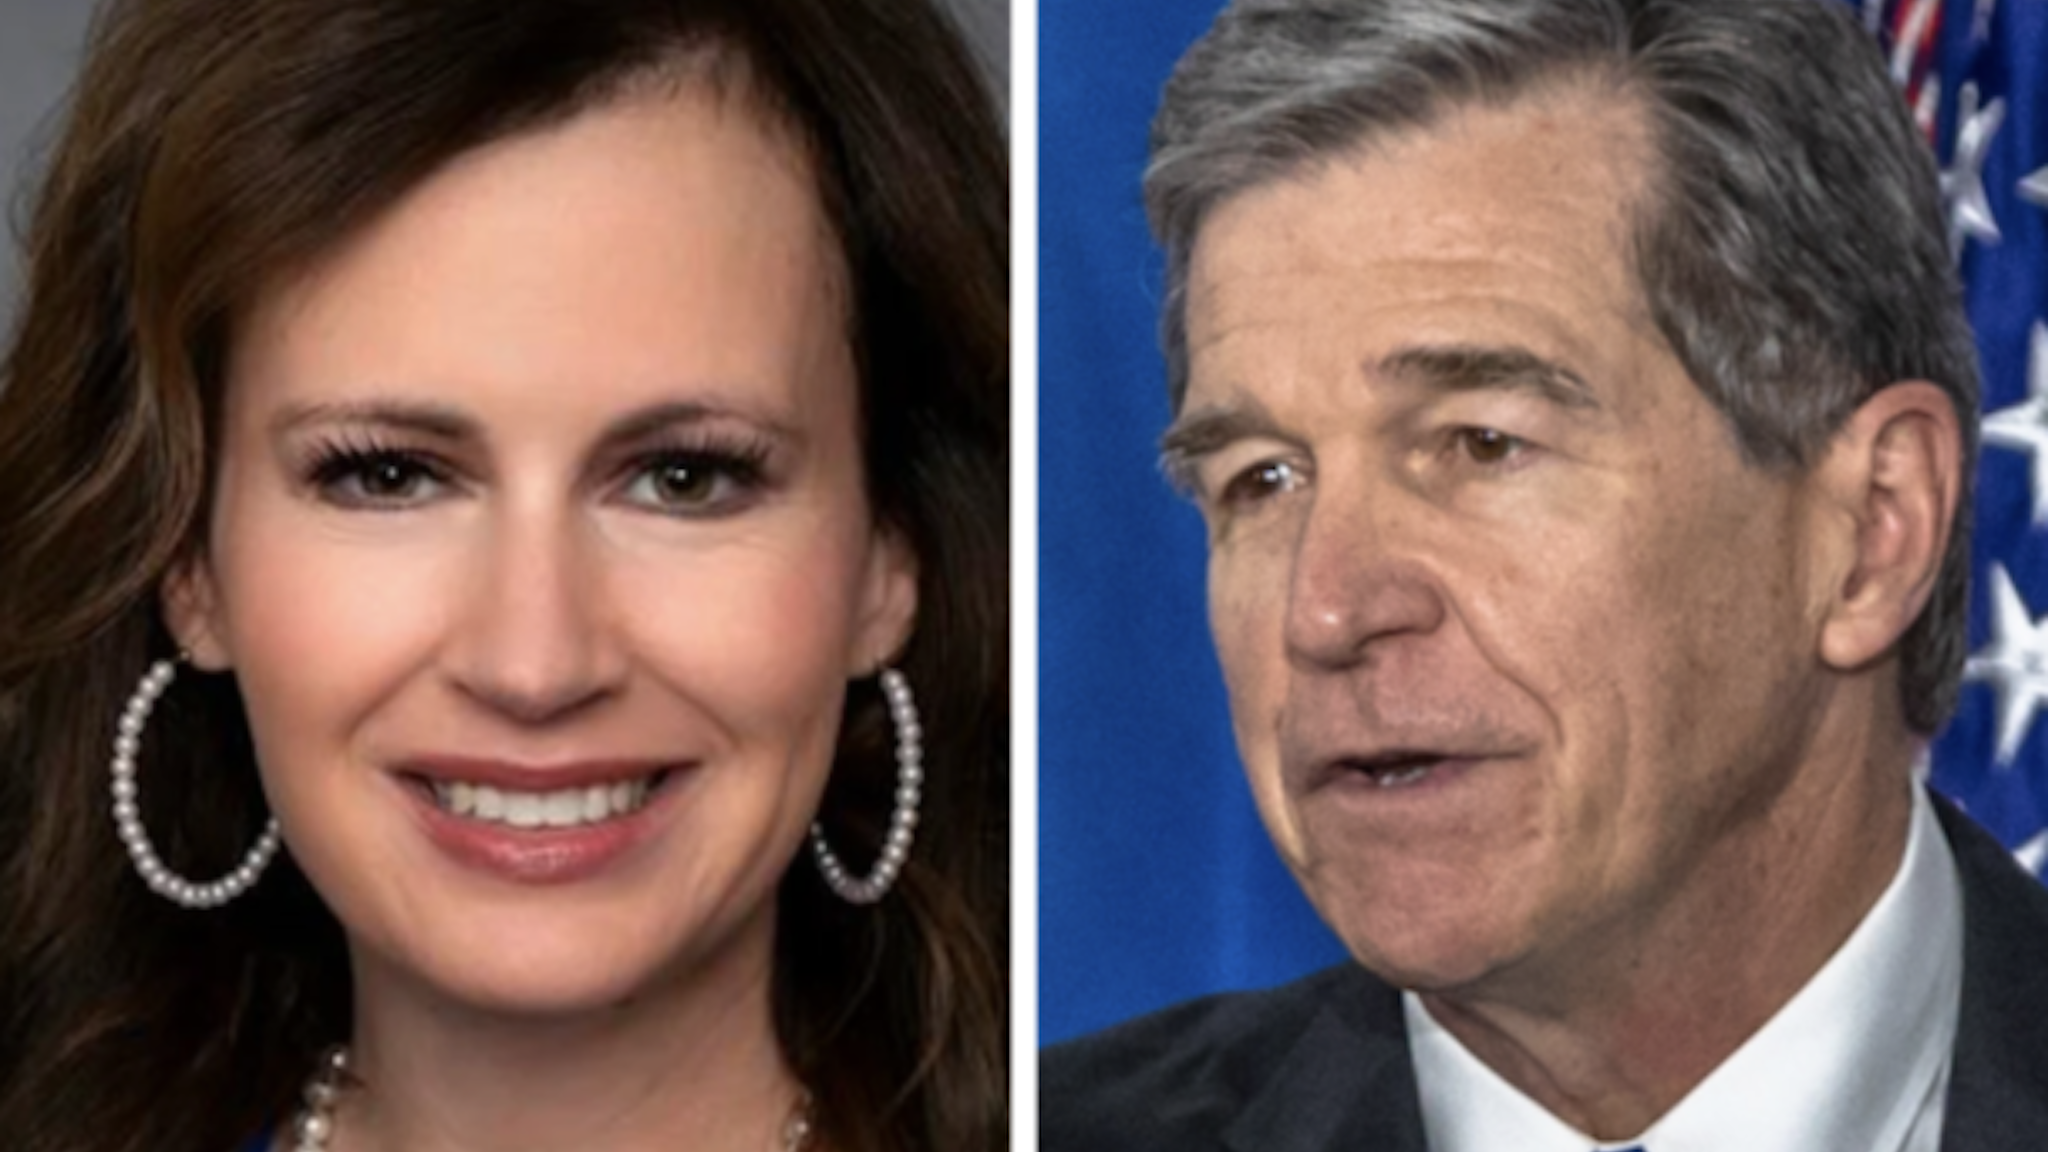 Tricia Cotham's switch to the GOP gives the party a veto-proof majority against Gov. Roy Cooper